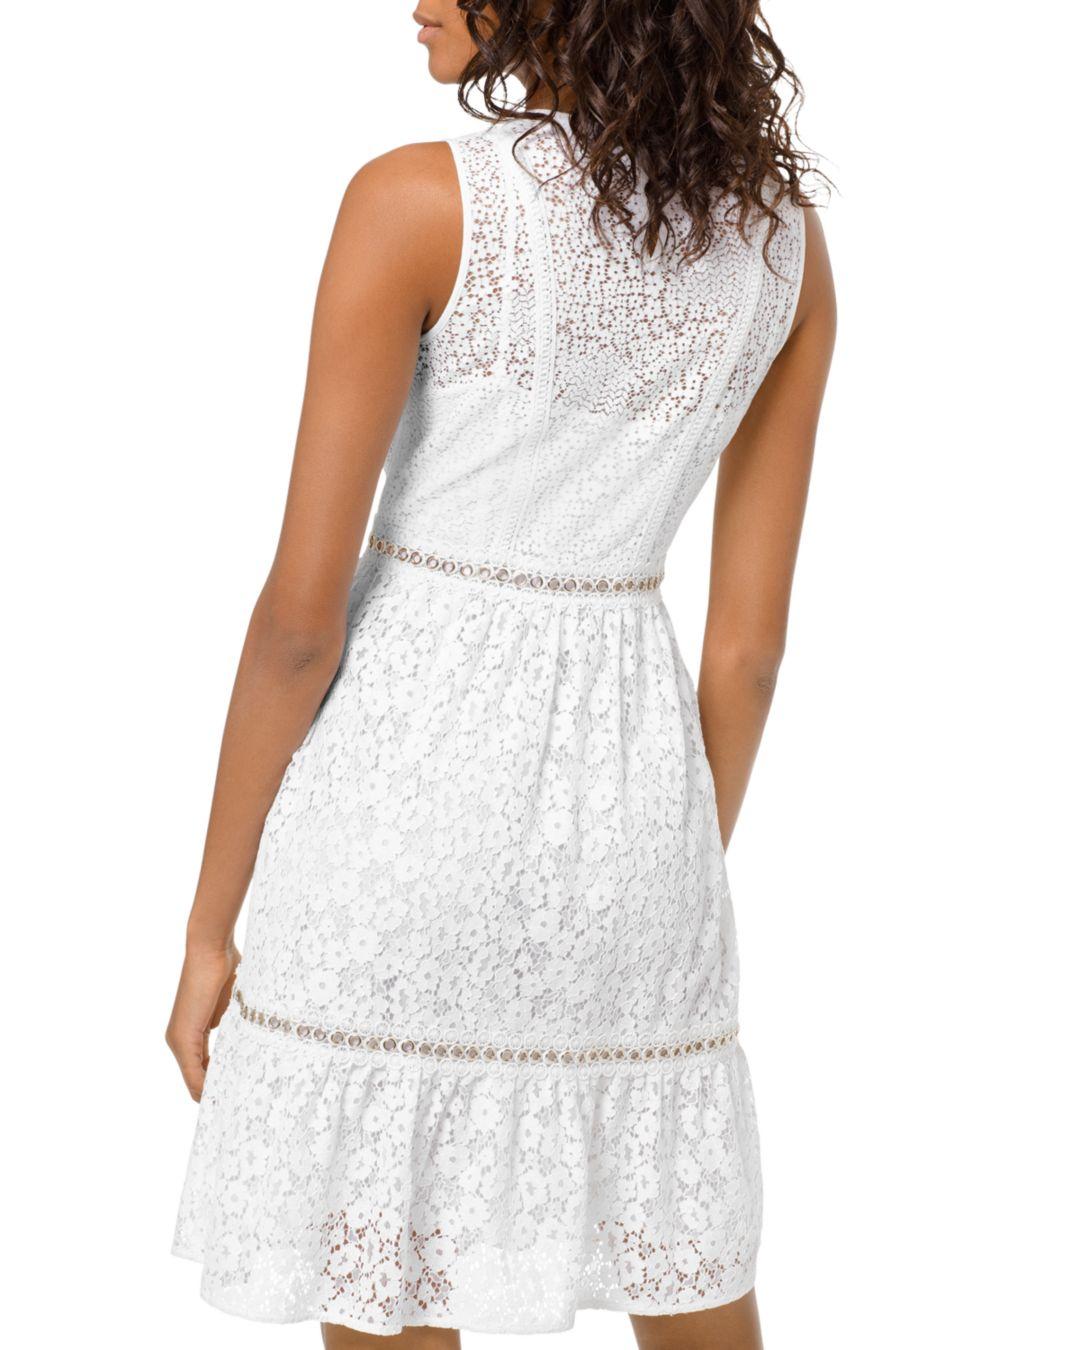 MICHAEL Michael Kors Mk Grommeted Floral Lace Dress in White | Lyst